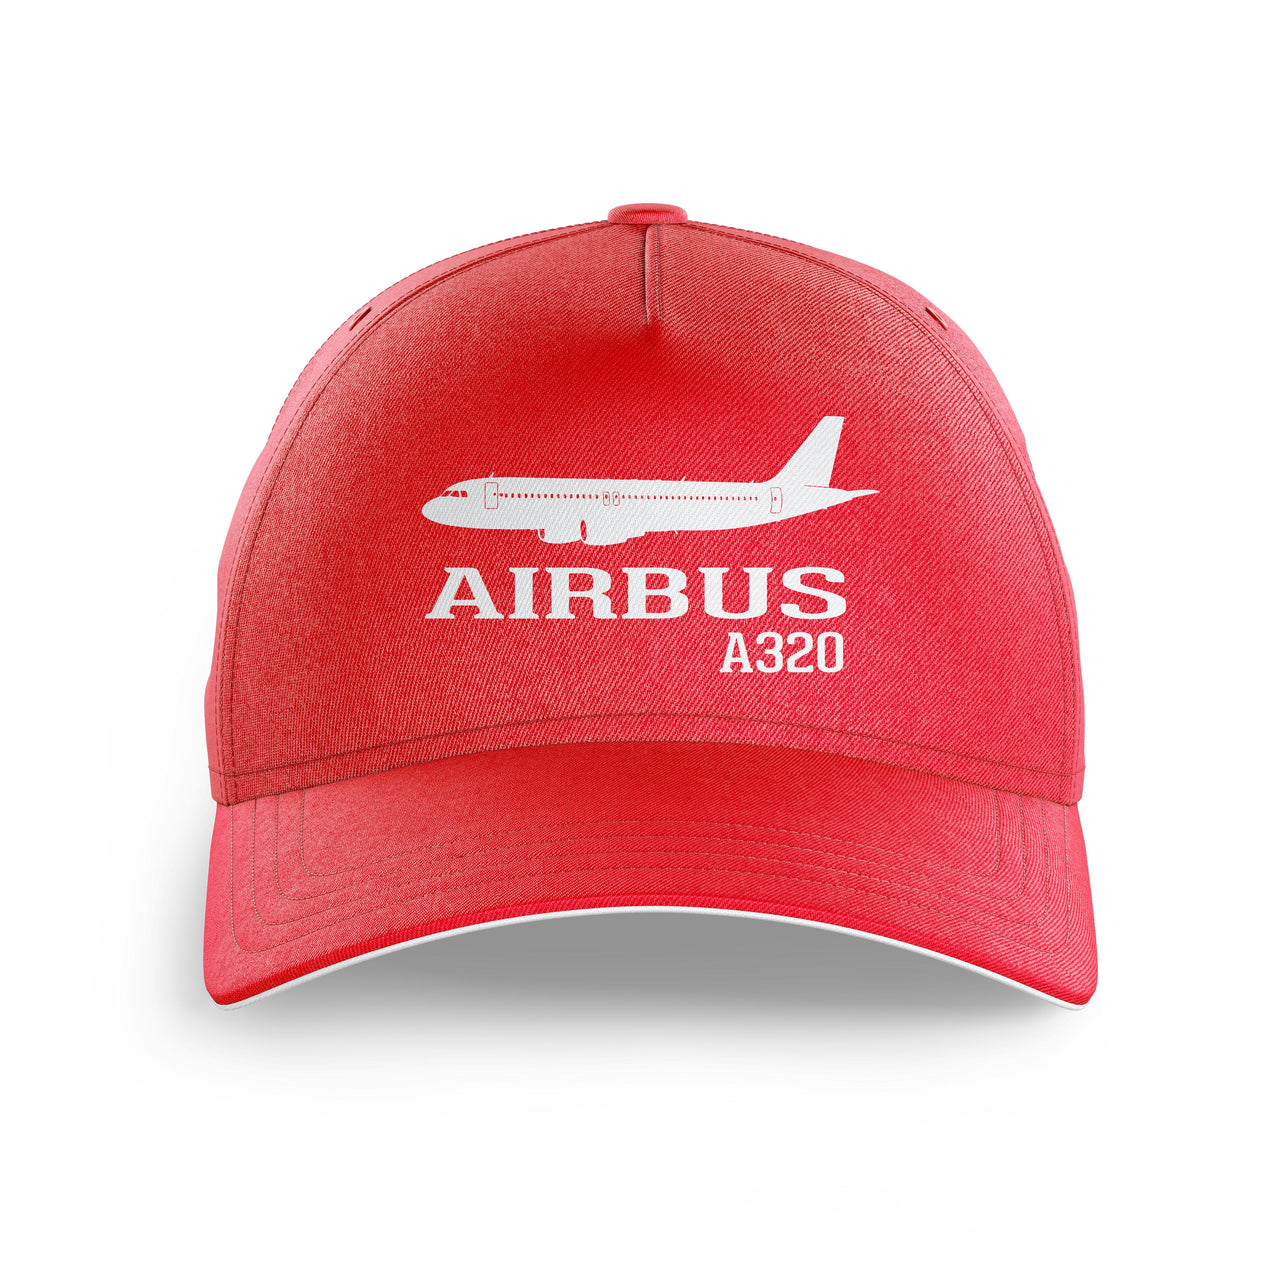 Airbus A320 Printed Hats